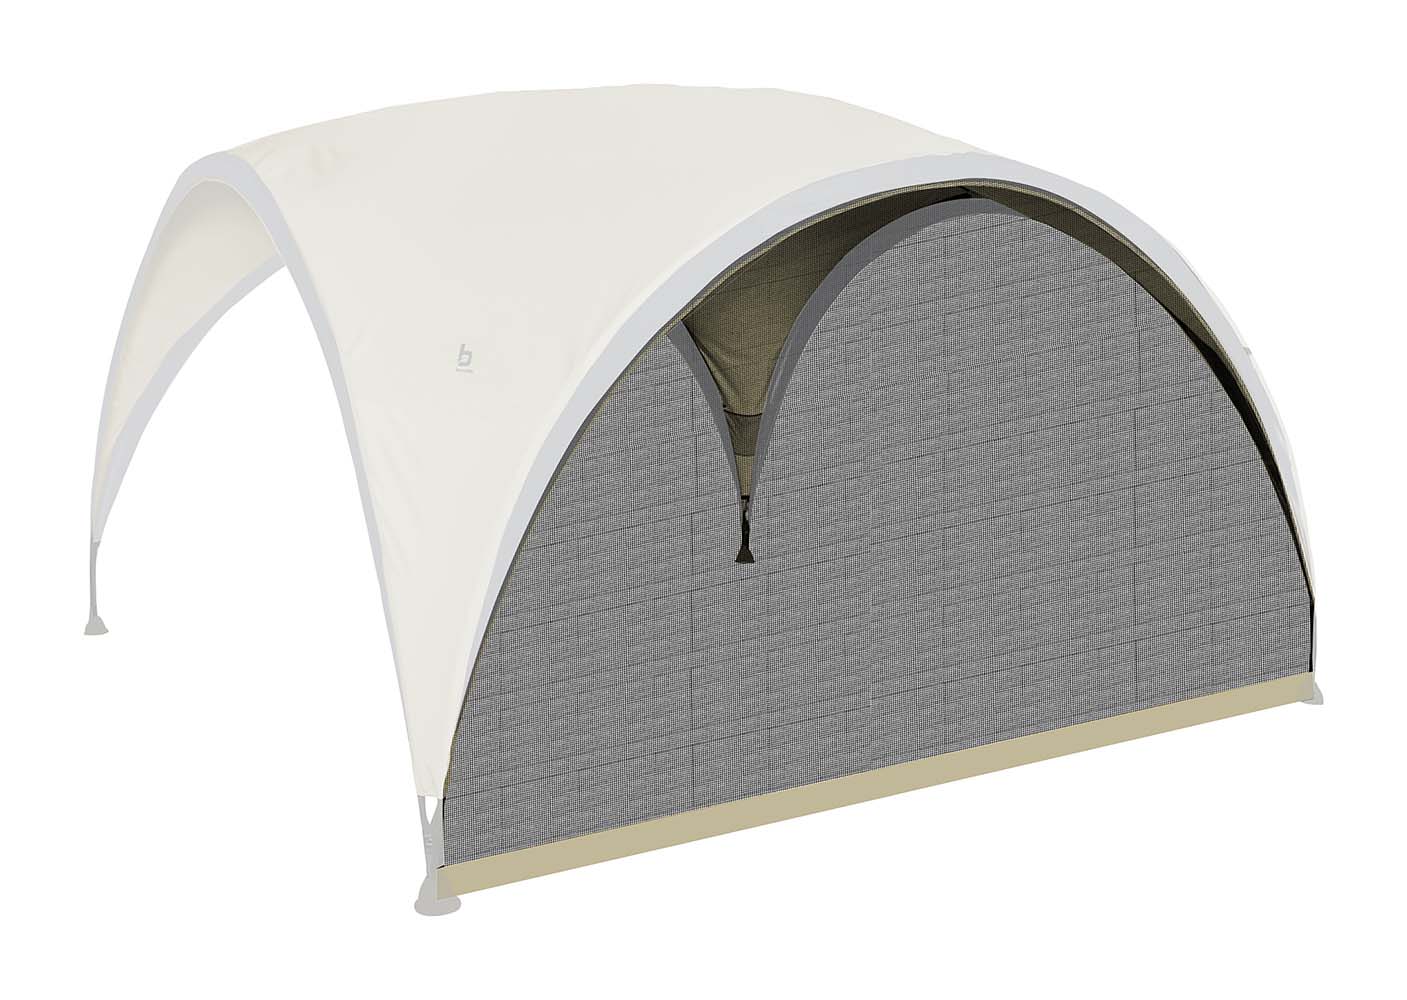 4472216 Bo-Camp - Sidewall - Party Shelter - Polyester - Medium - With netting sidewall